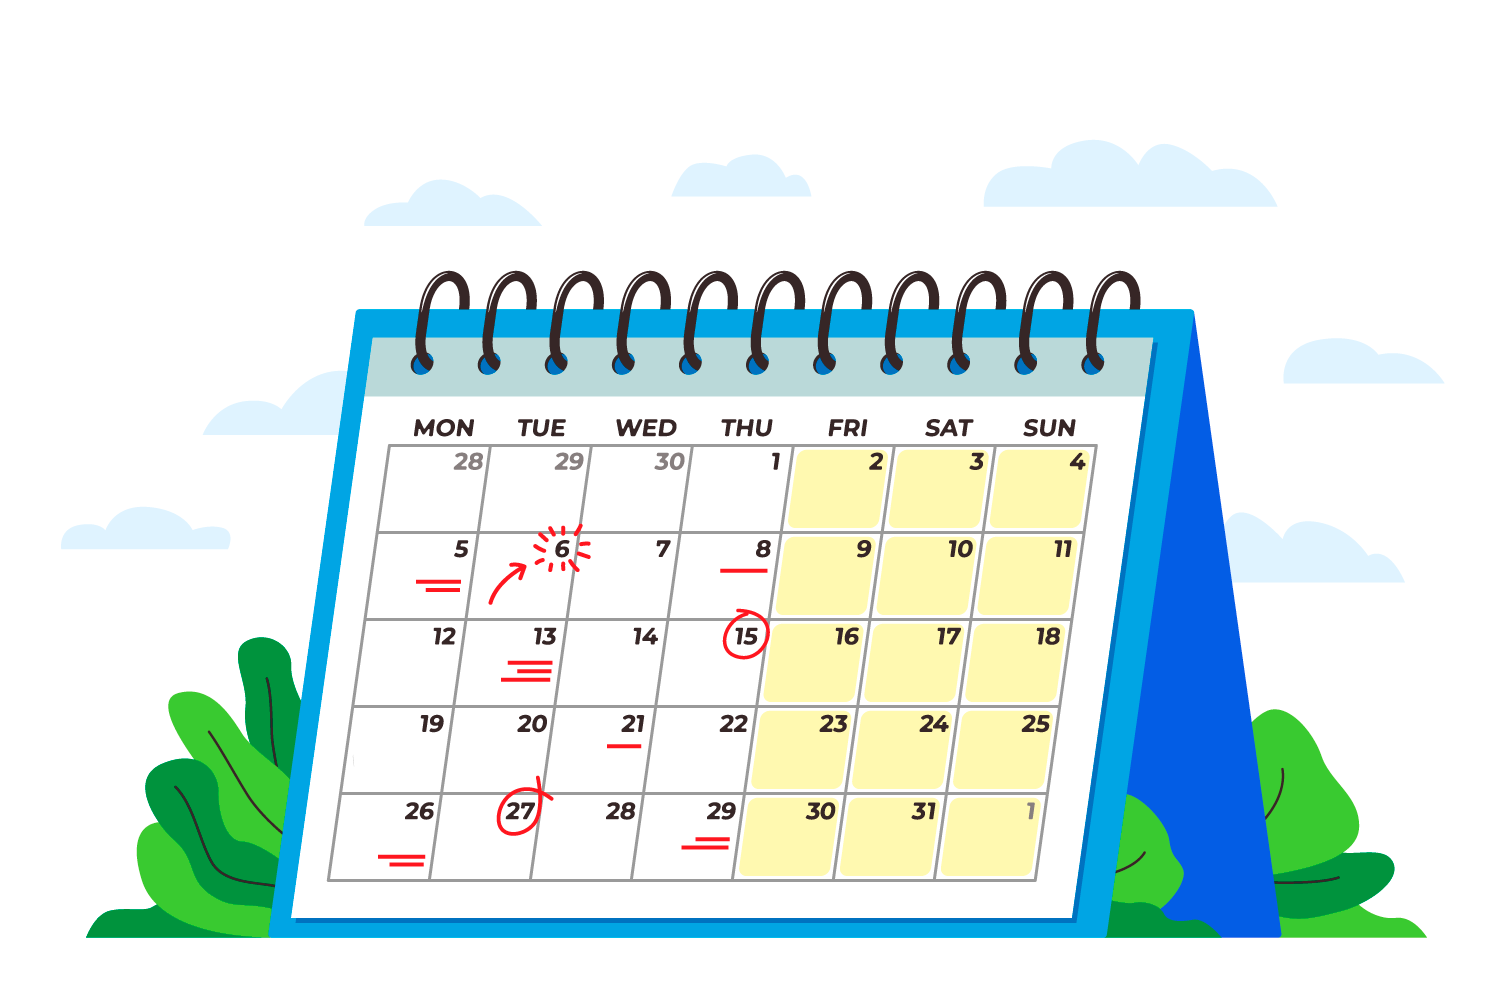 An illustration of a calendar showing a four-day work week